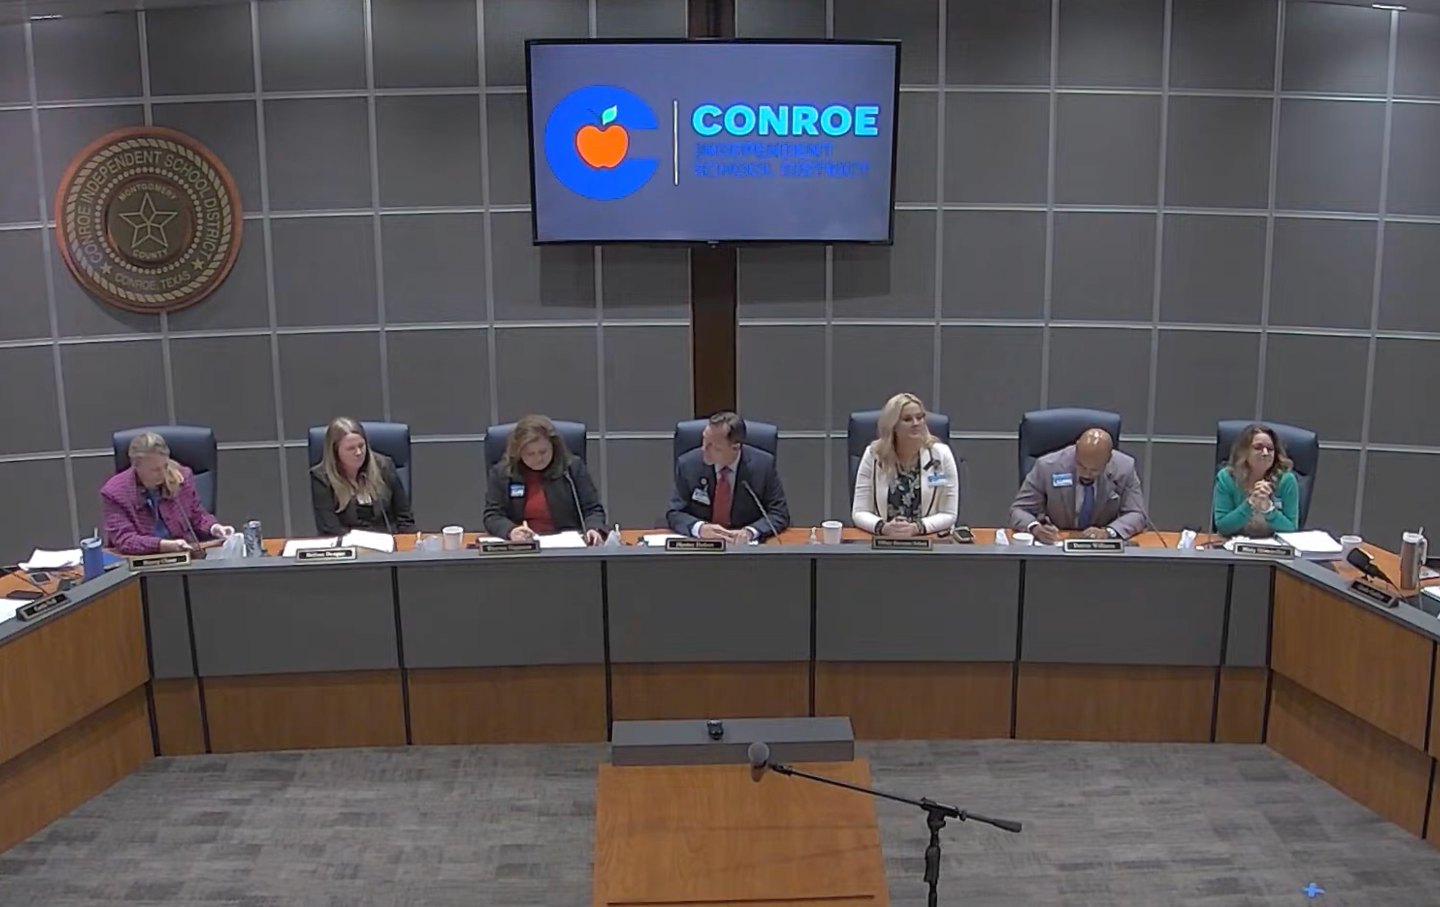 A meeting of the Board of Trustees of the Conroe Independent School District.